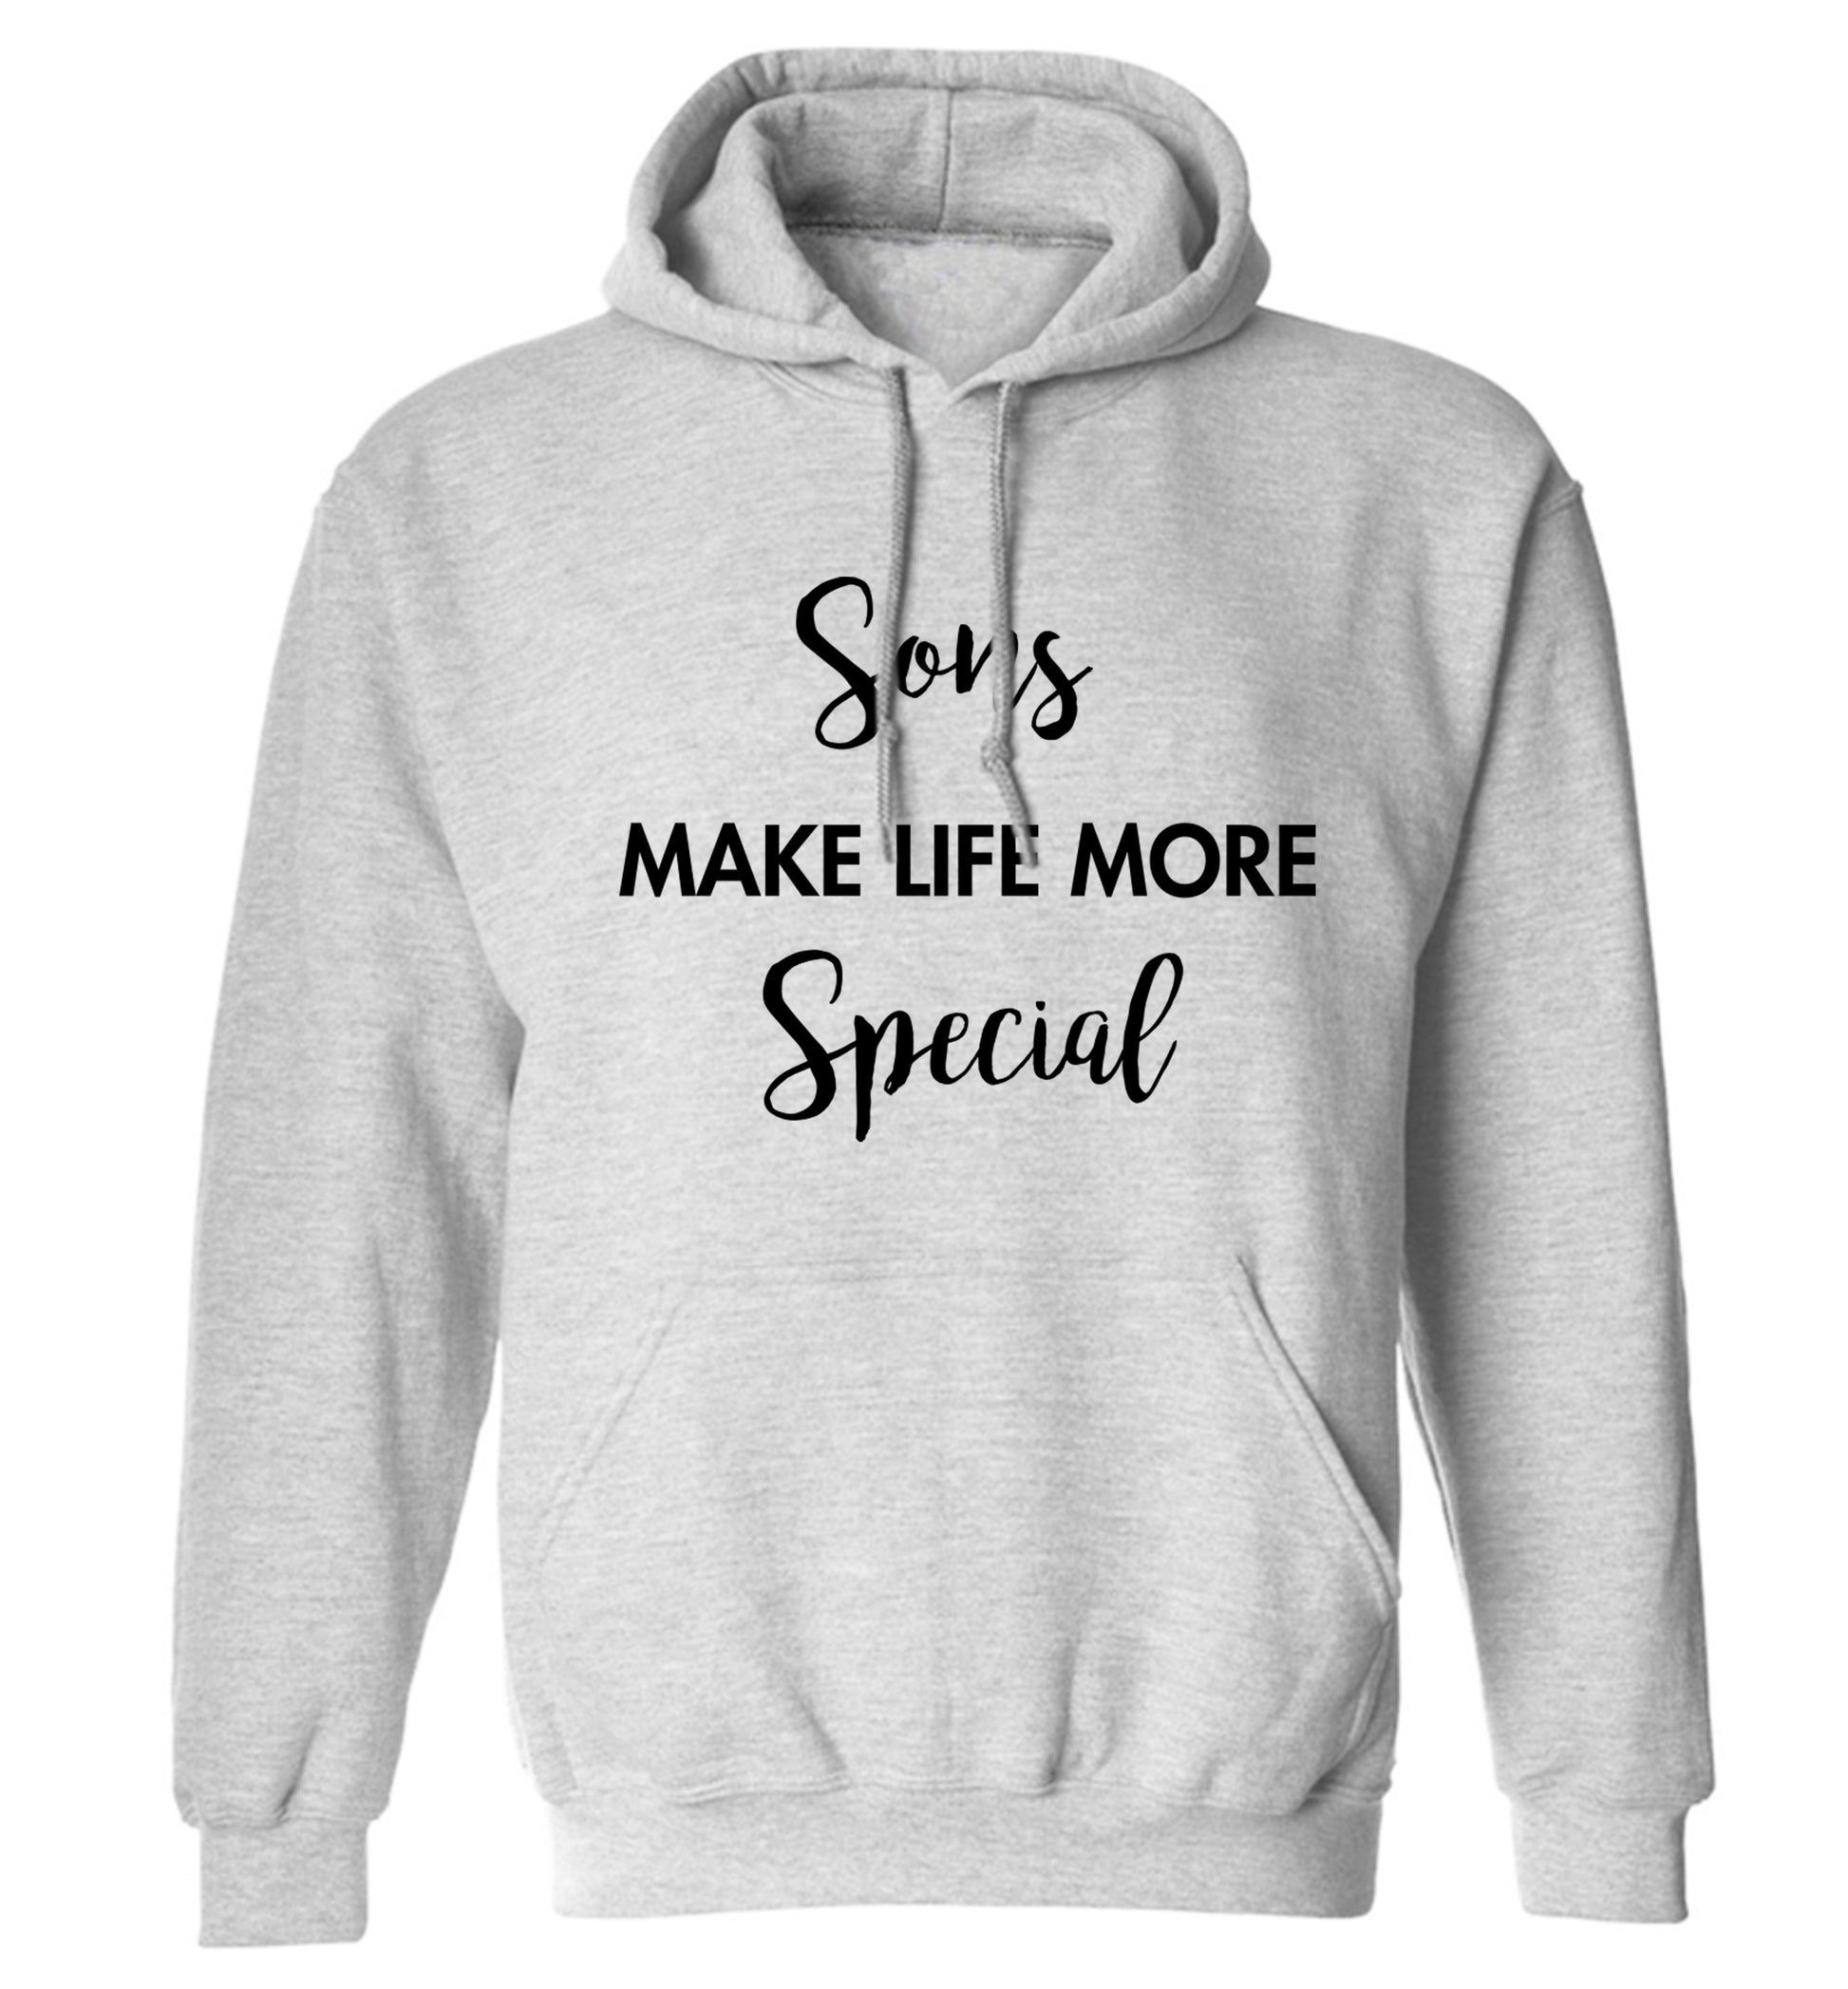 Sons make life more special adults unisex grey hoodie 2XL